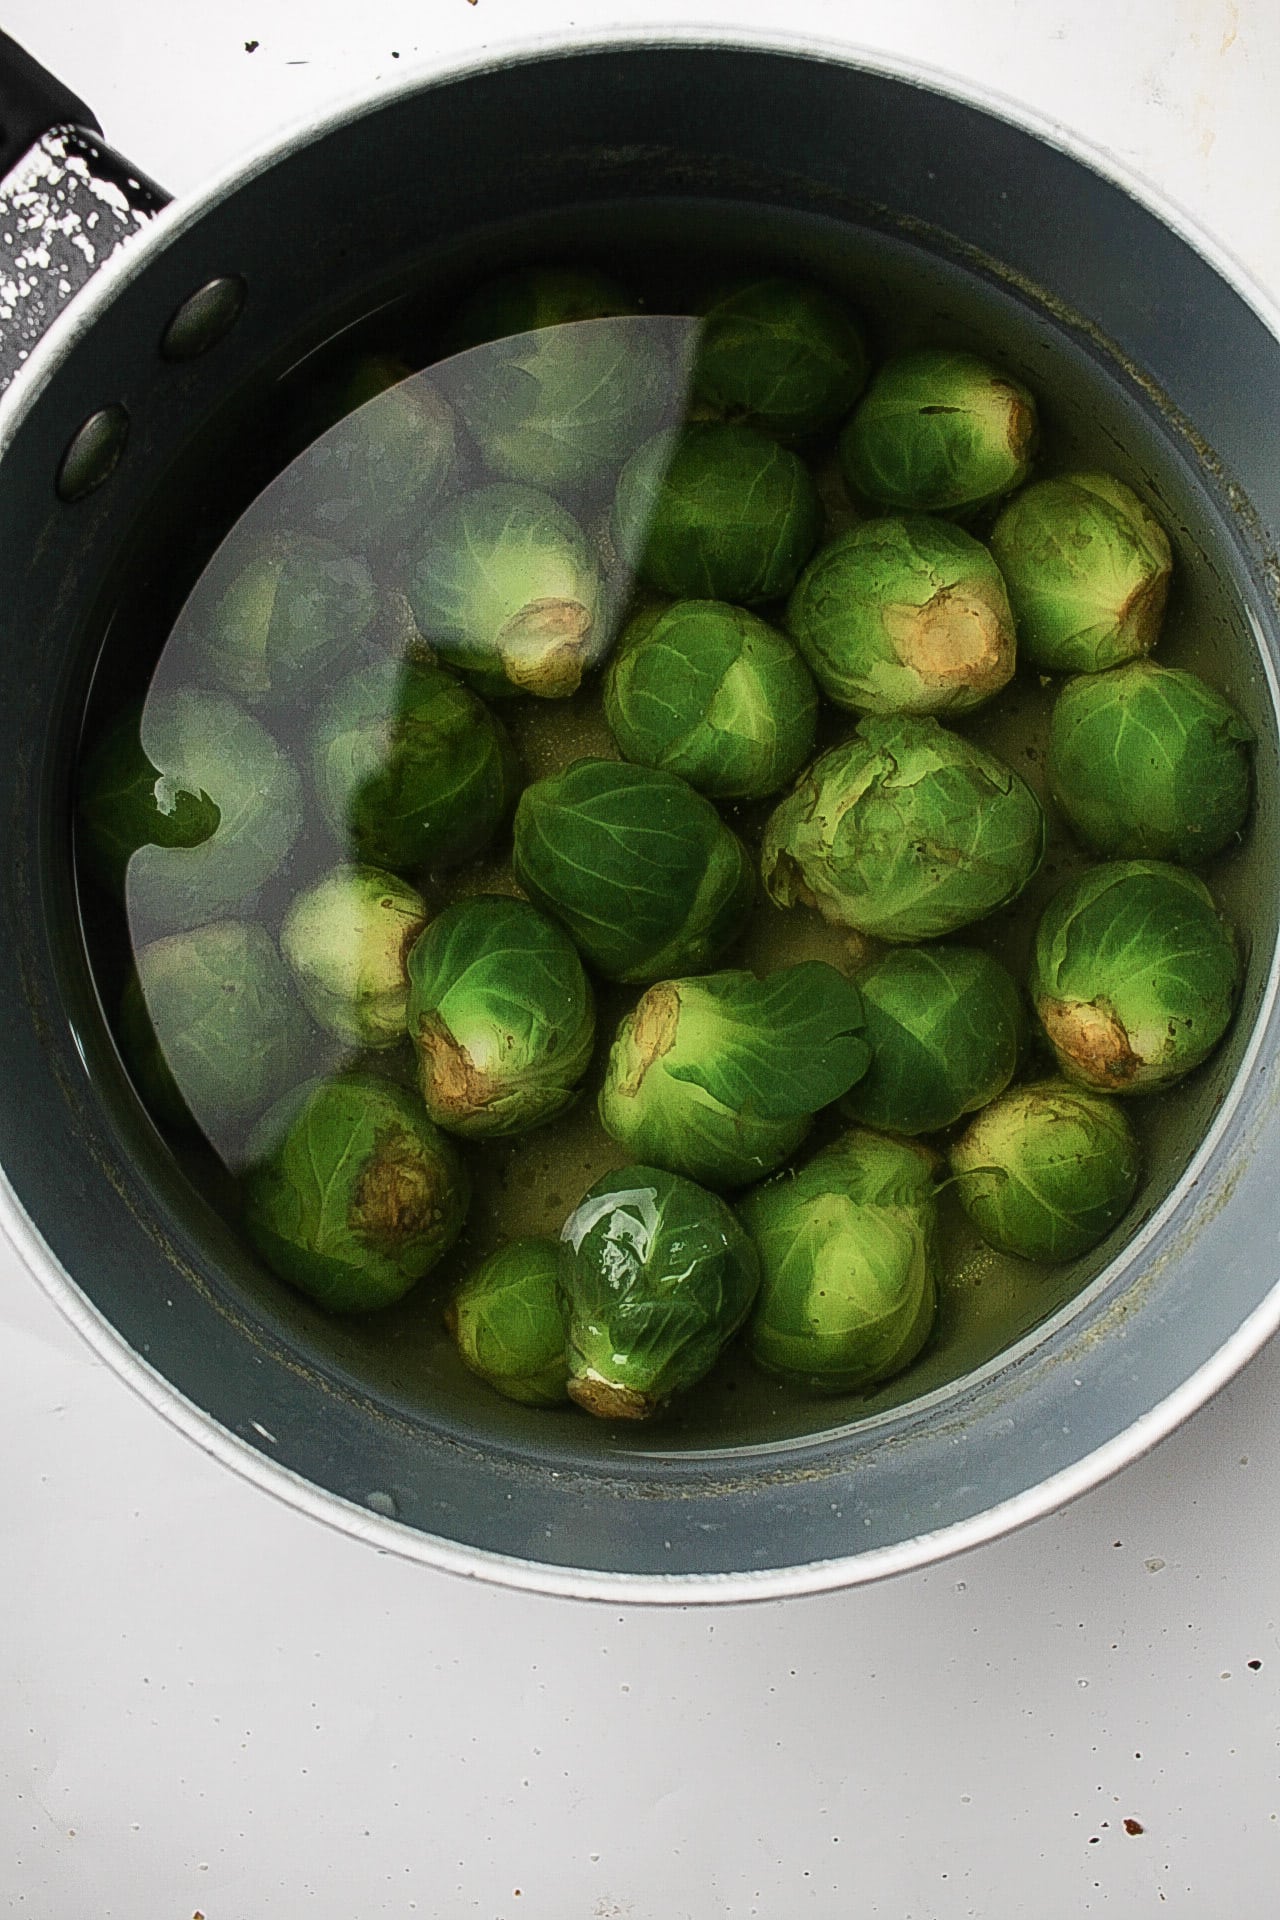 Air fryer smashed brussel sprouts